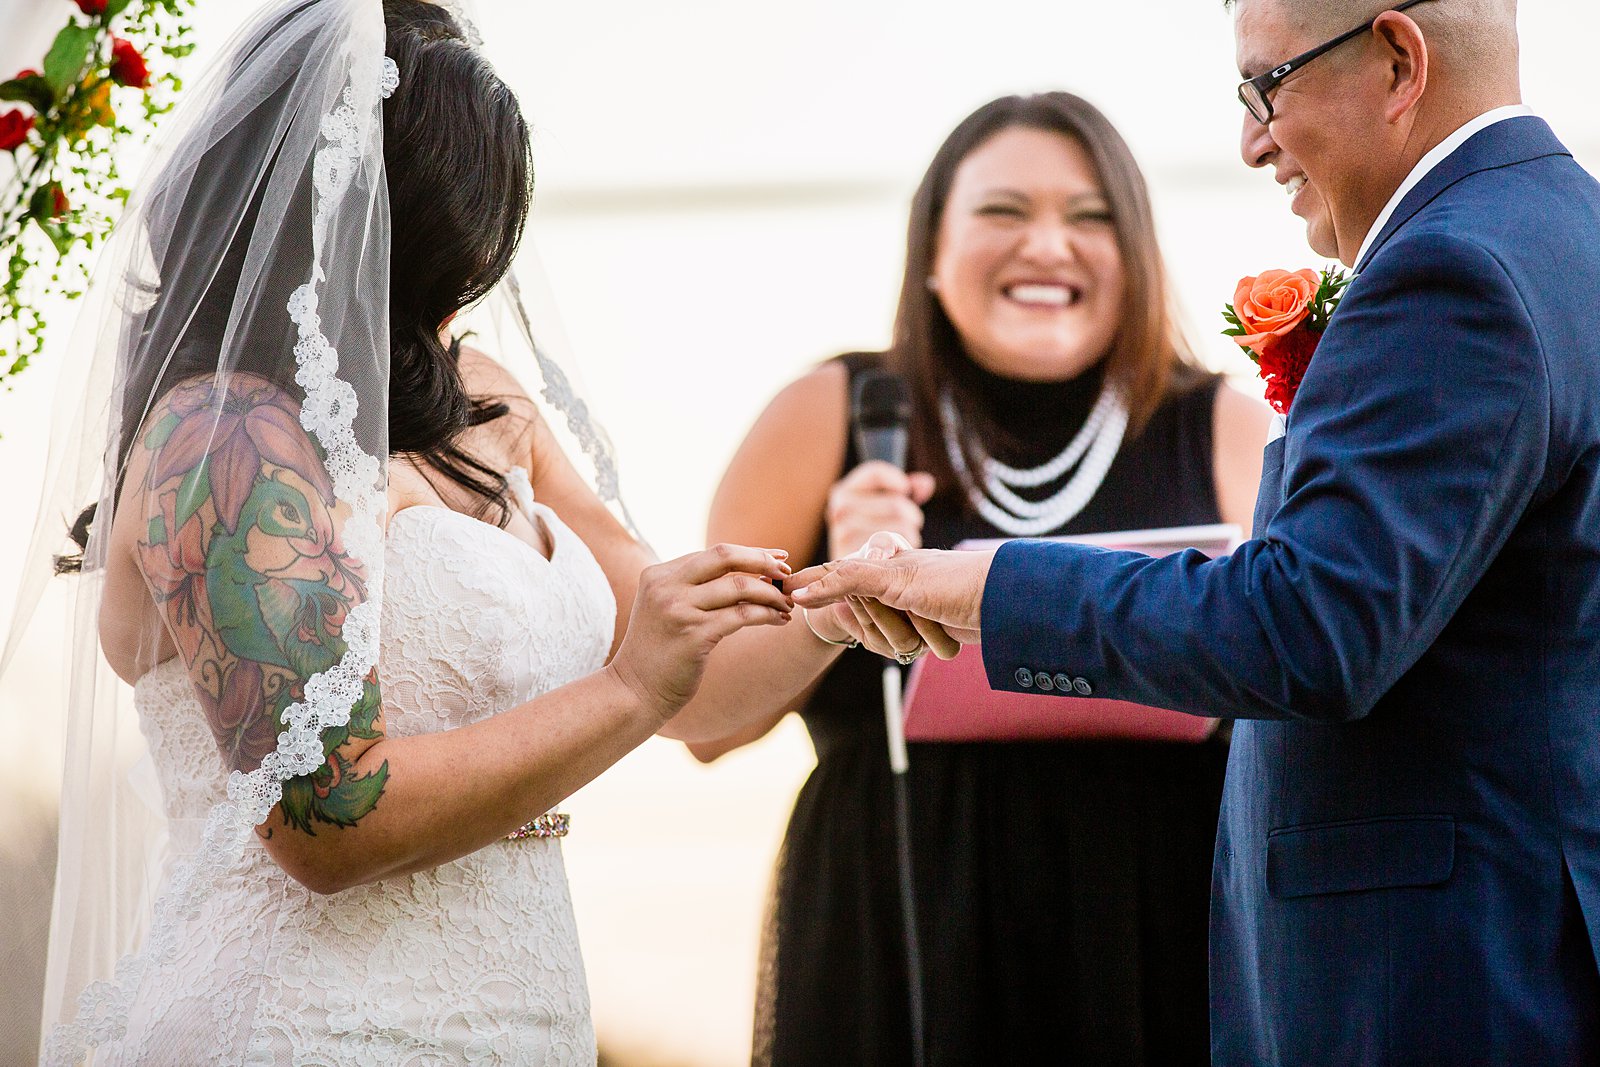 Bride and groom exchange rings during their wedding ceremony at The Farmhouse at Schnepf Farms by Arizona wedding photographer PMA Photography.